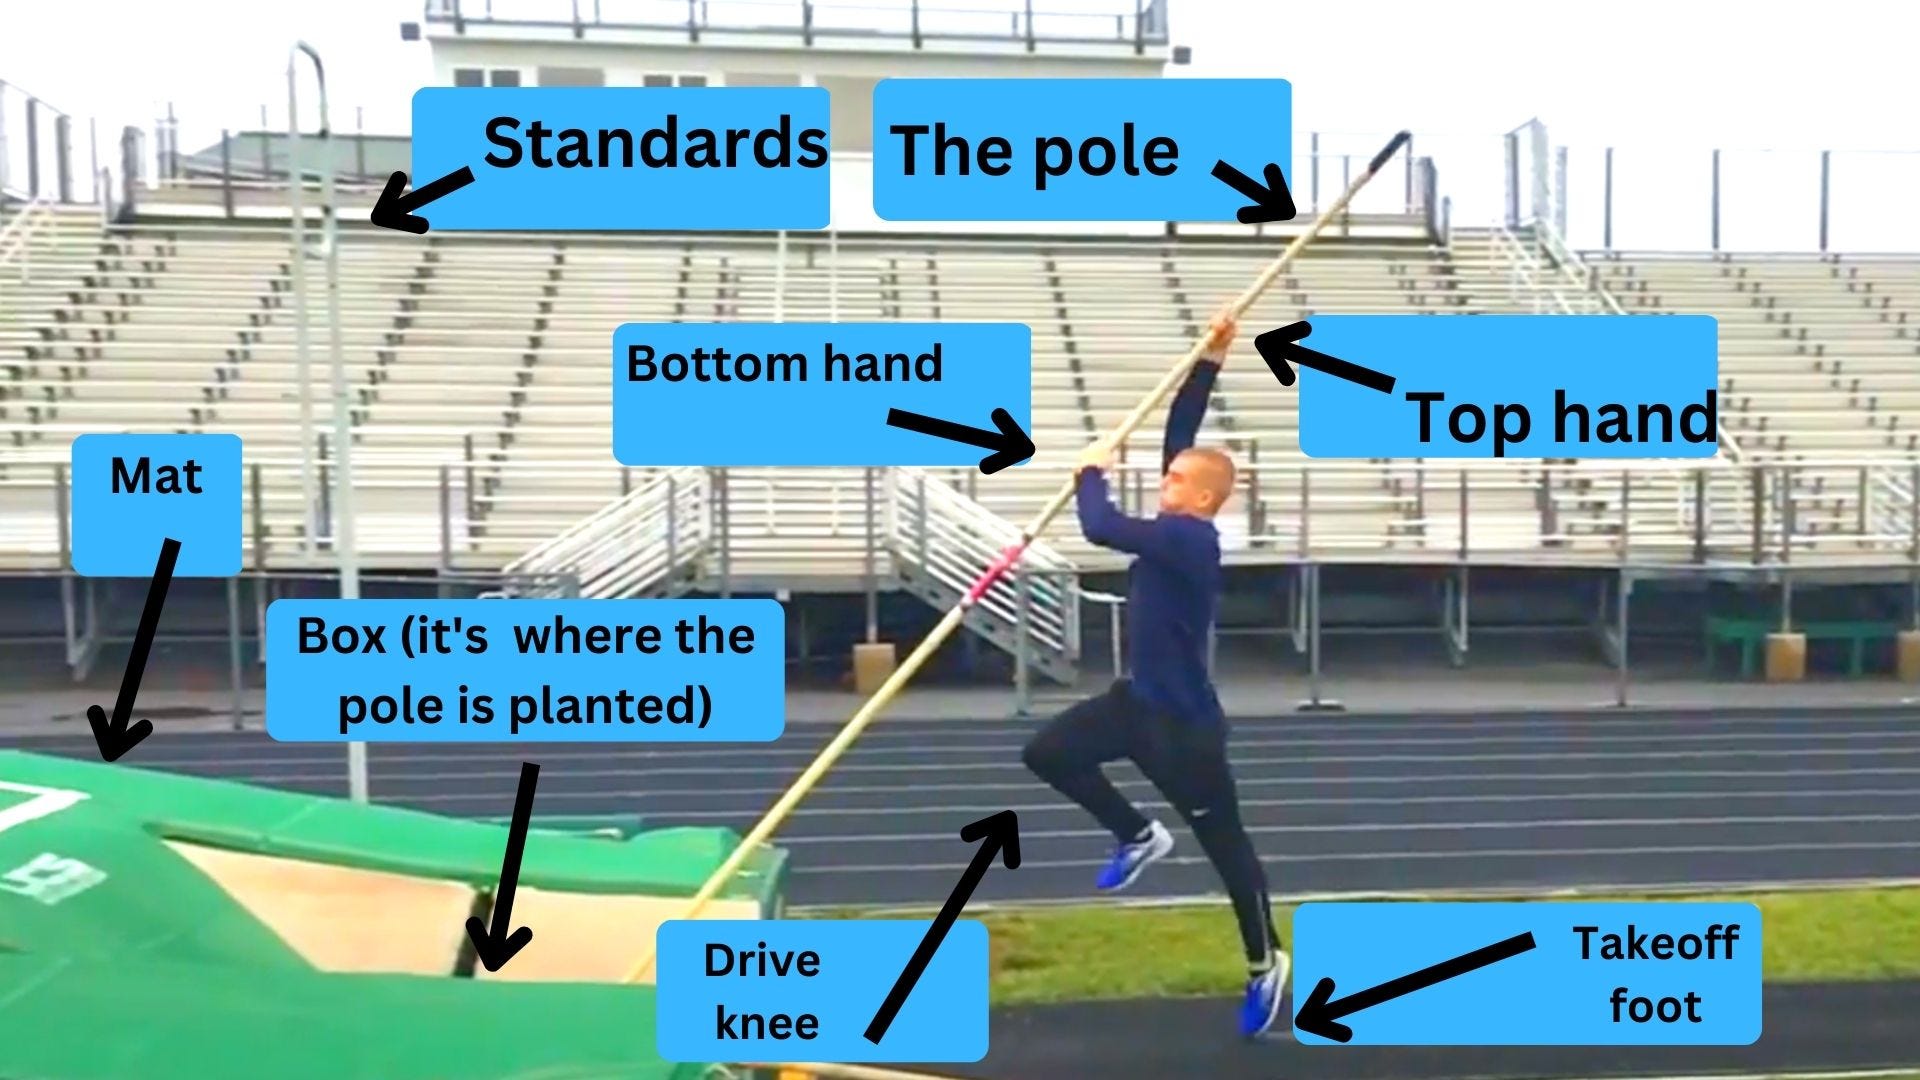 3 Track & Field Drills to Become a Better Pole Vaulter